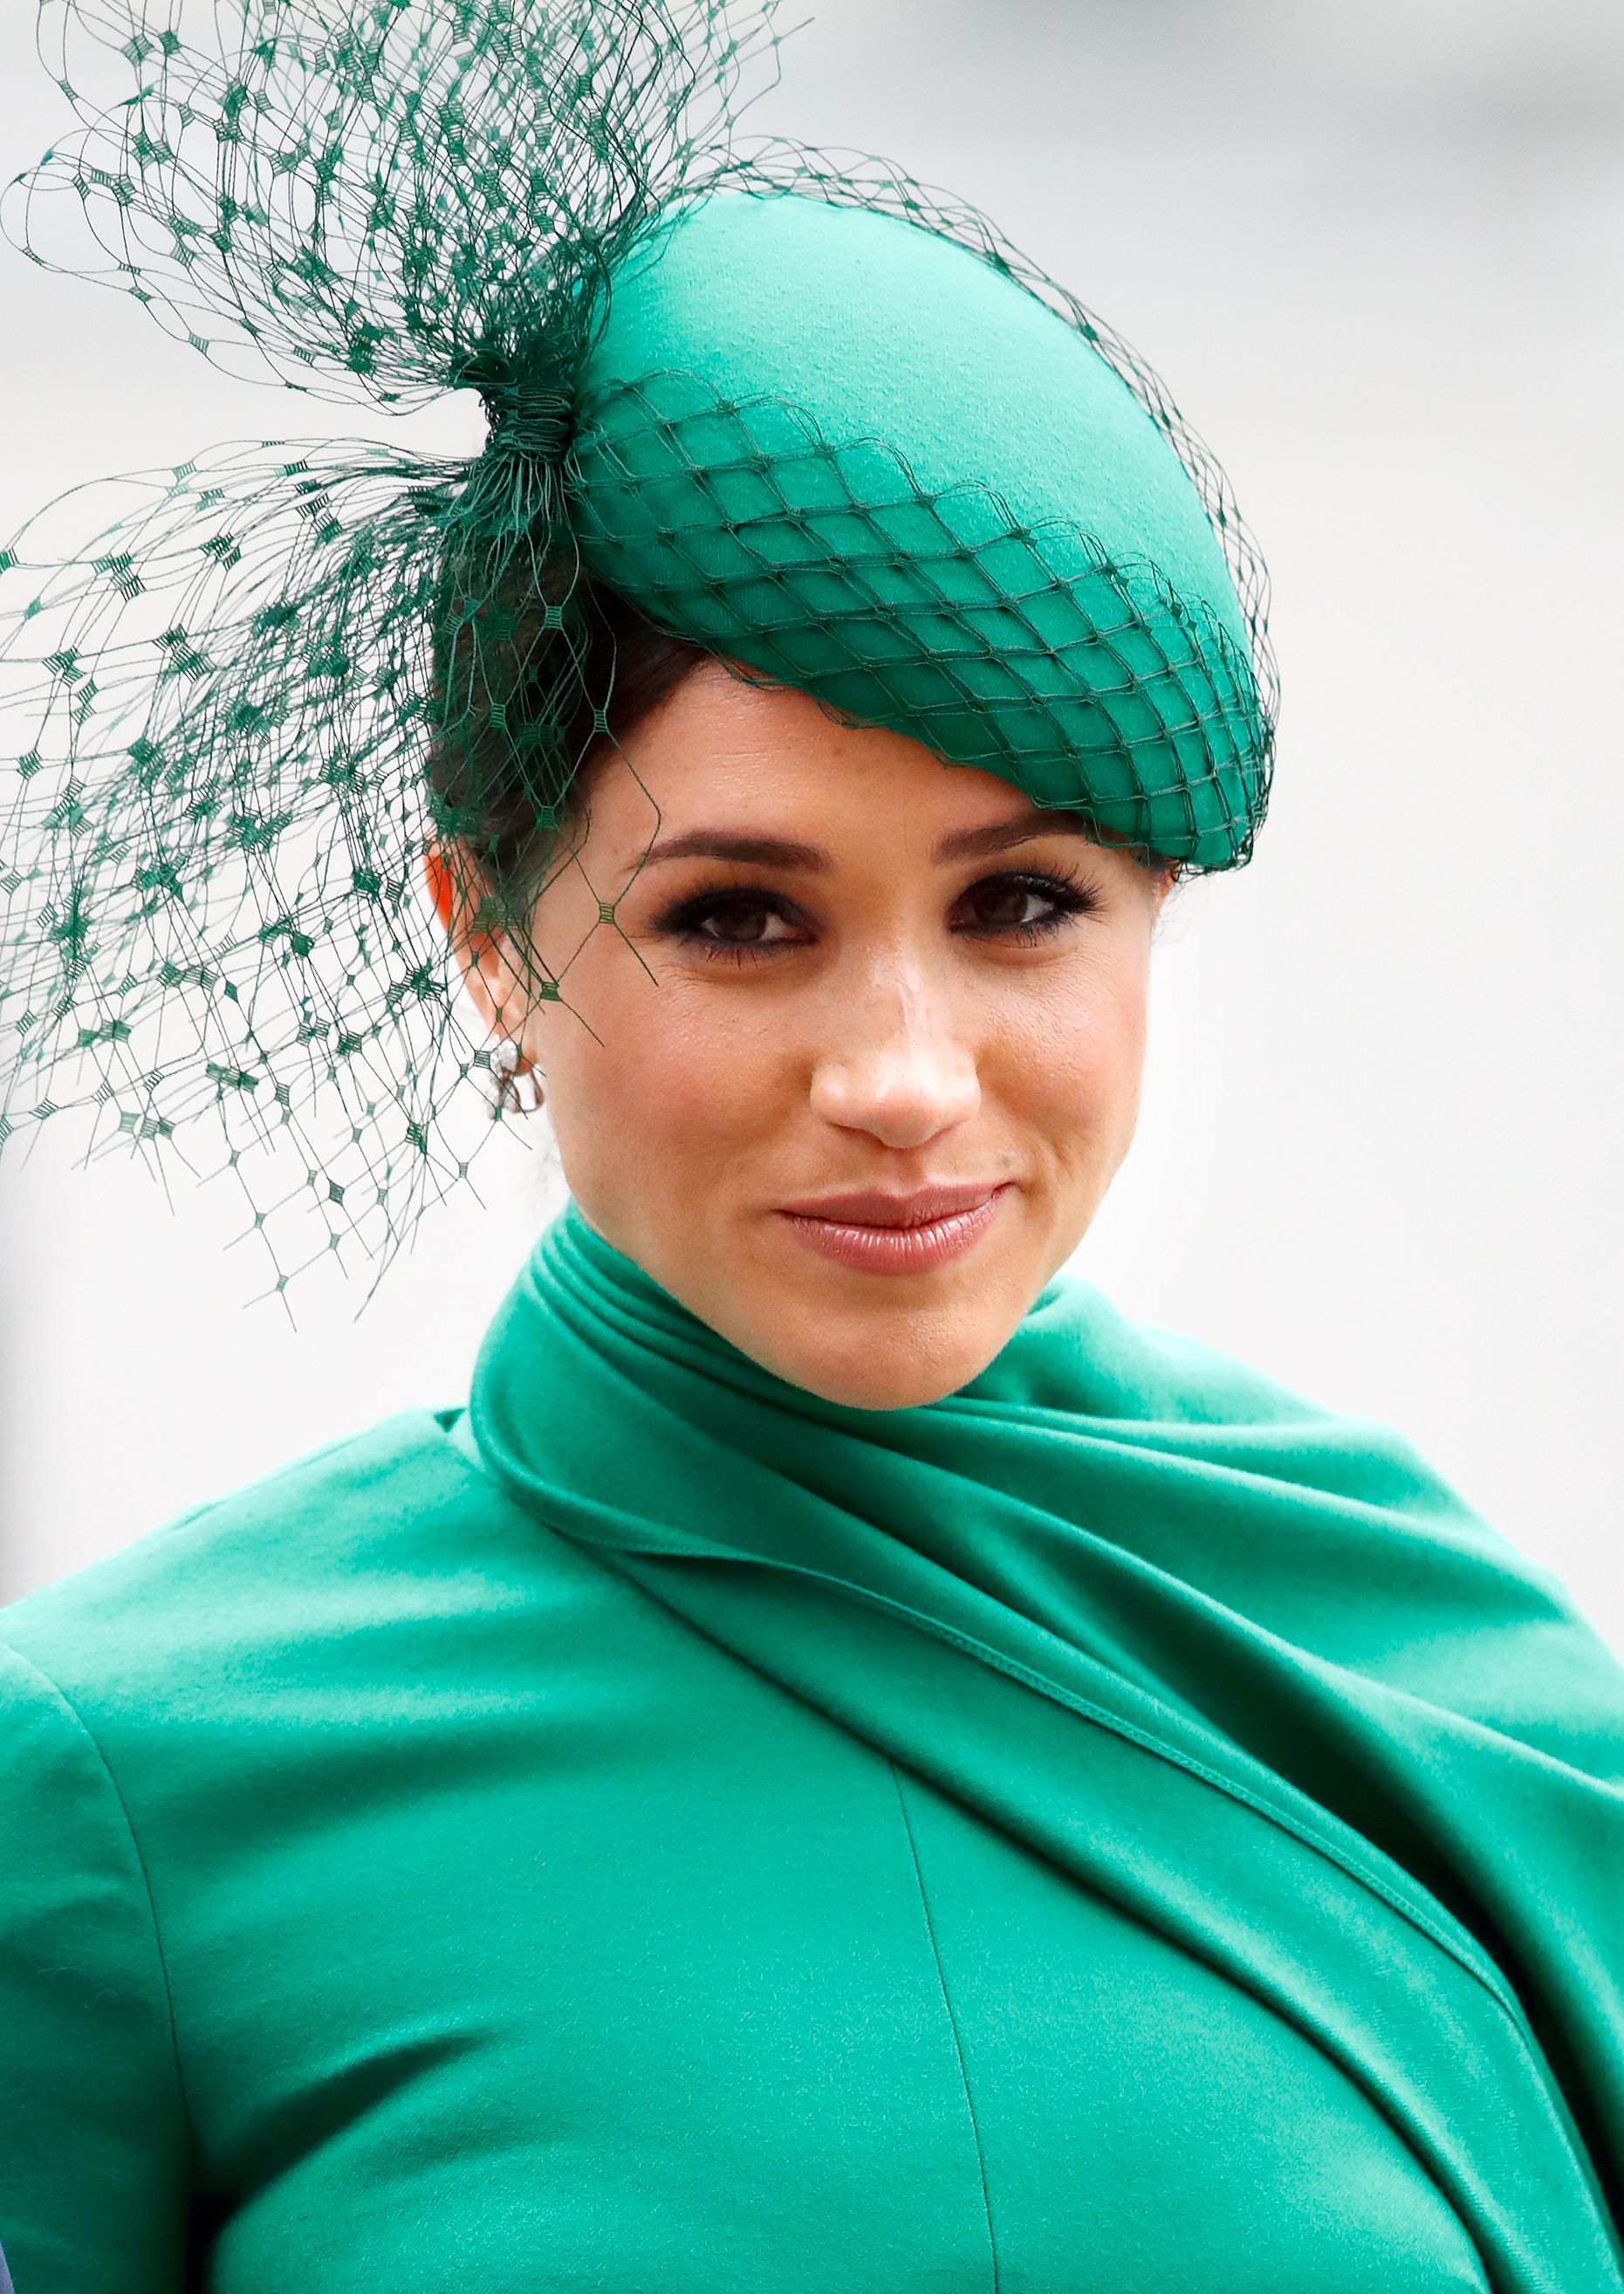 20+ Top Royal Hats, from Princess Margaret's Toppers to Princess Diana's  Millinery